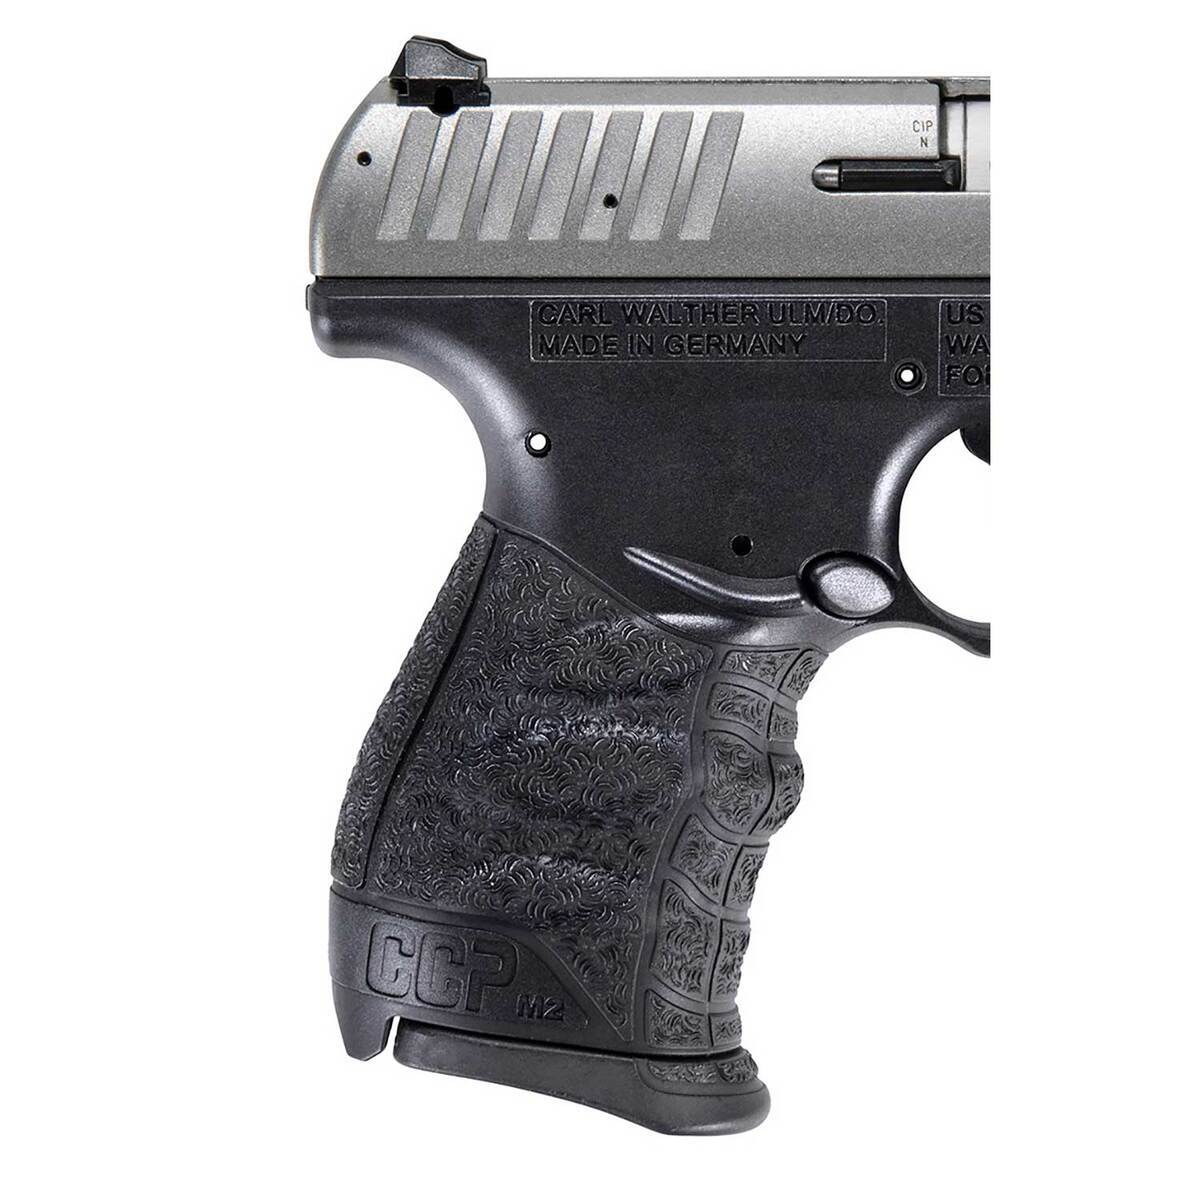 Walther Ccp M2 9mm Luger 354in Stainless Steel Pistol 81 Rounds Sportsmans Warehouse 8527